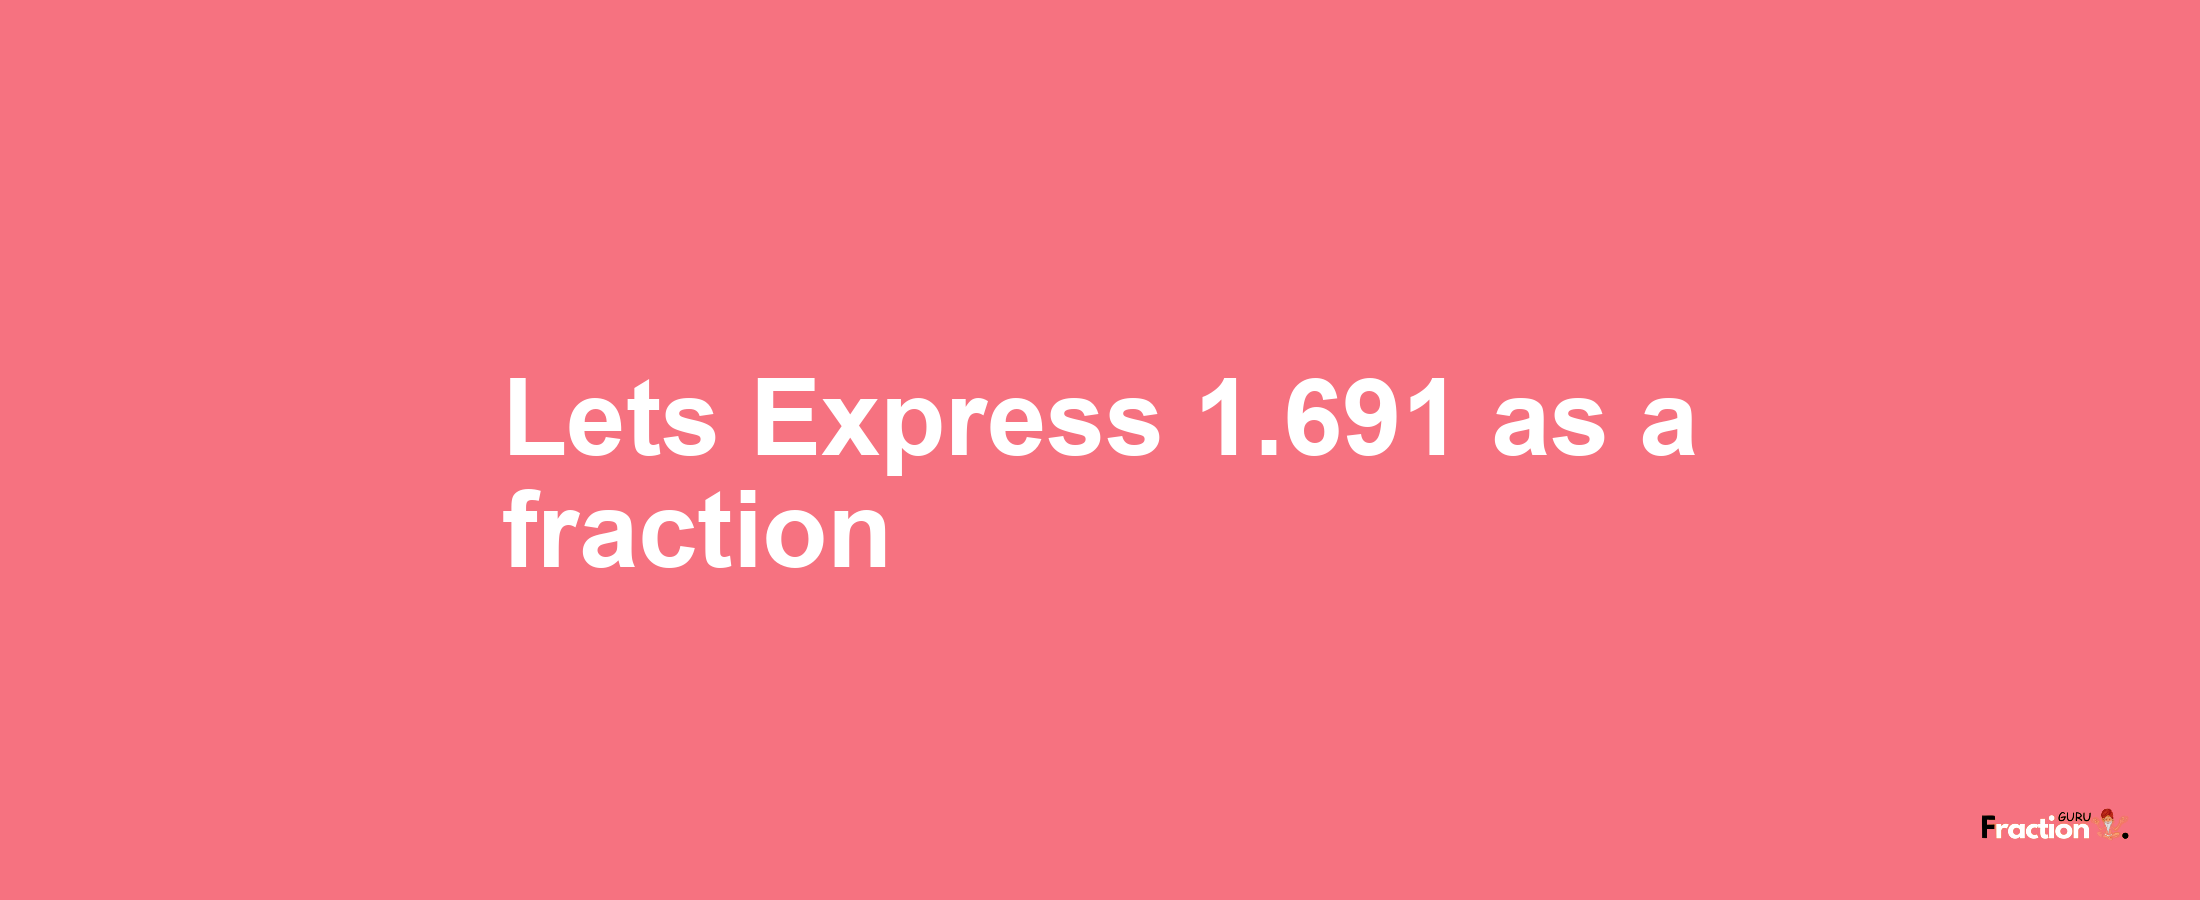 Lets Express 1.691 as afraction